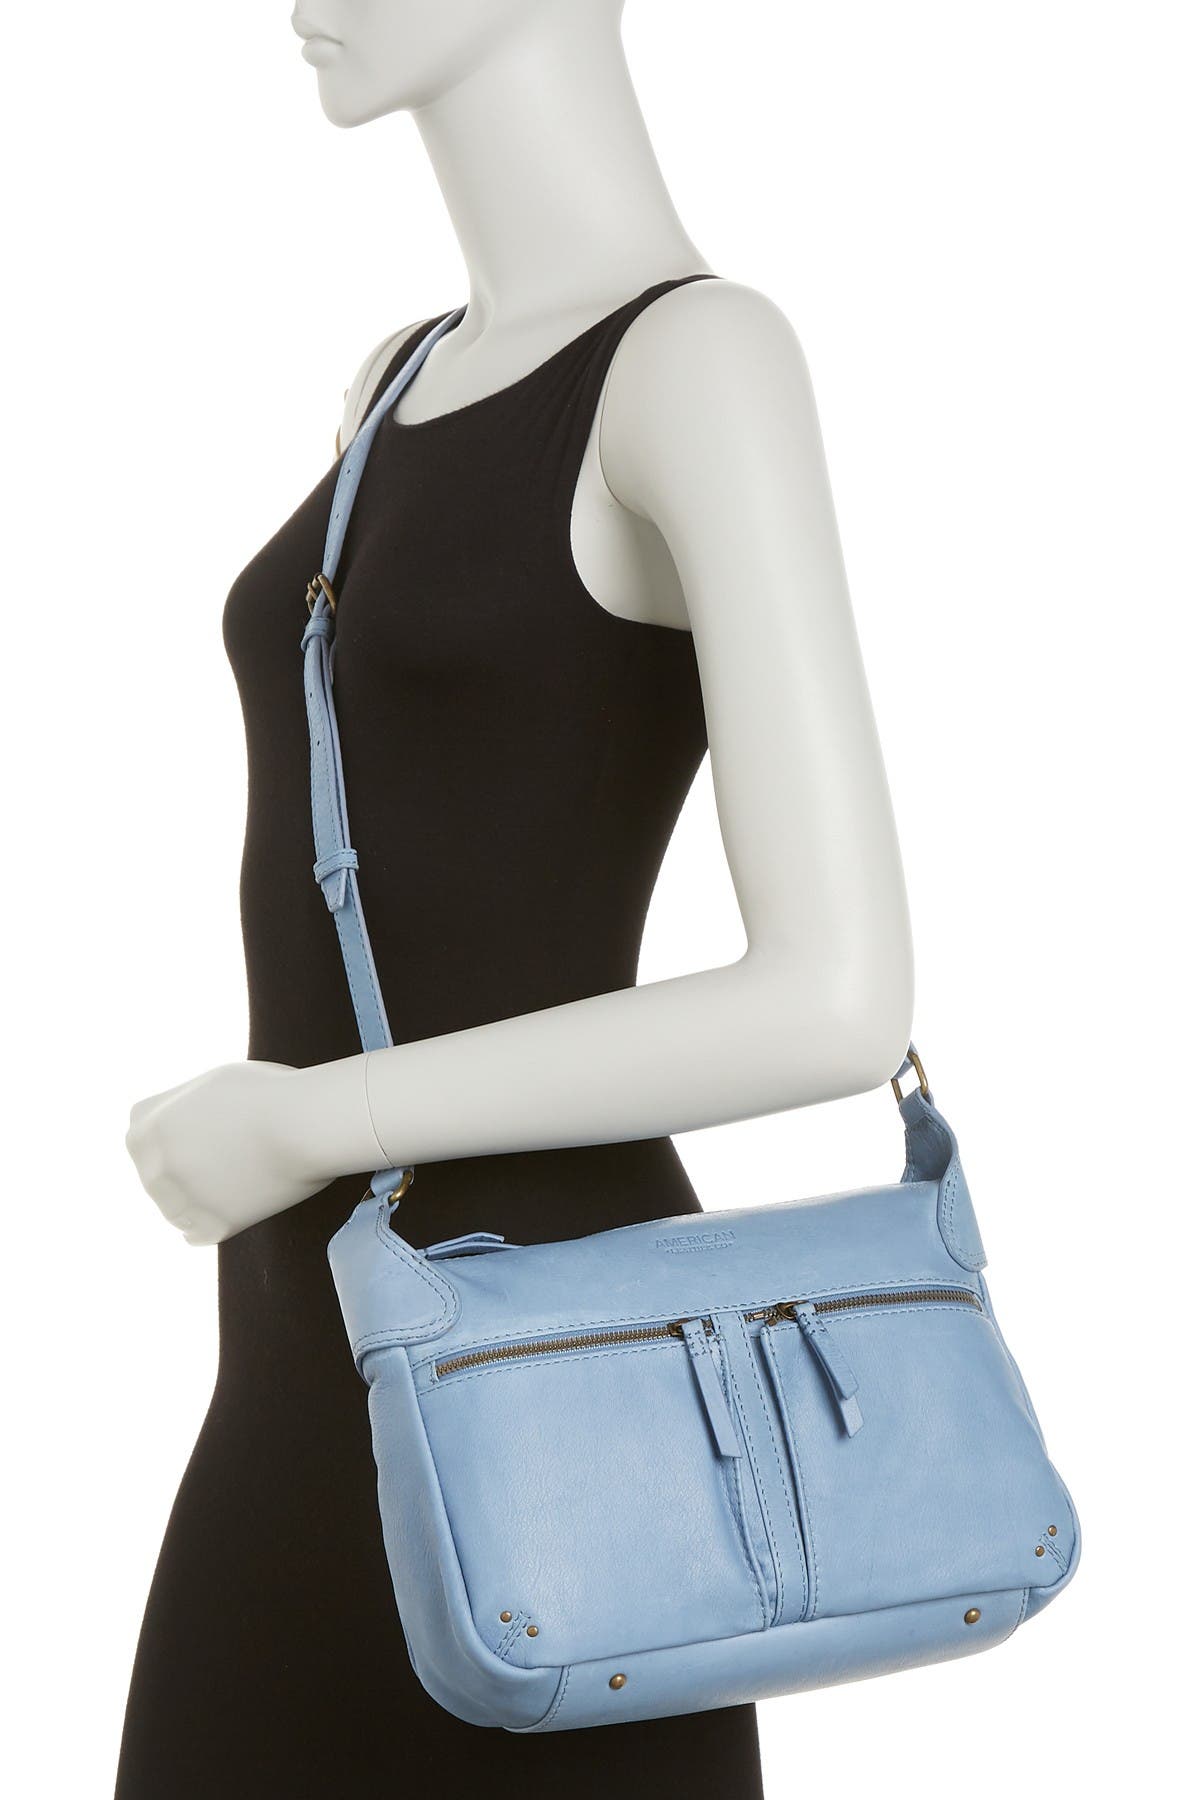 American Leather Co. Hanover Crossbody Leather Bag In Glacier Blue Smooth